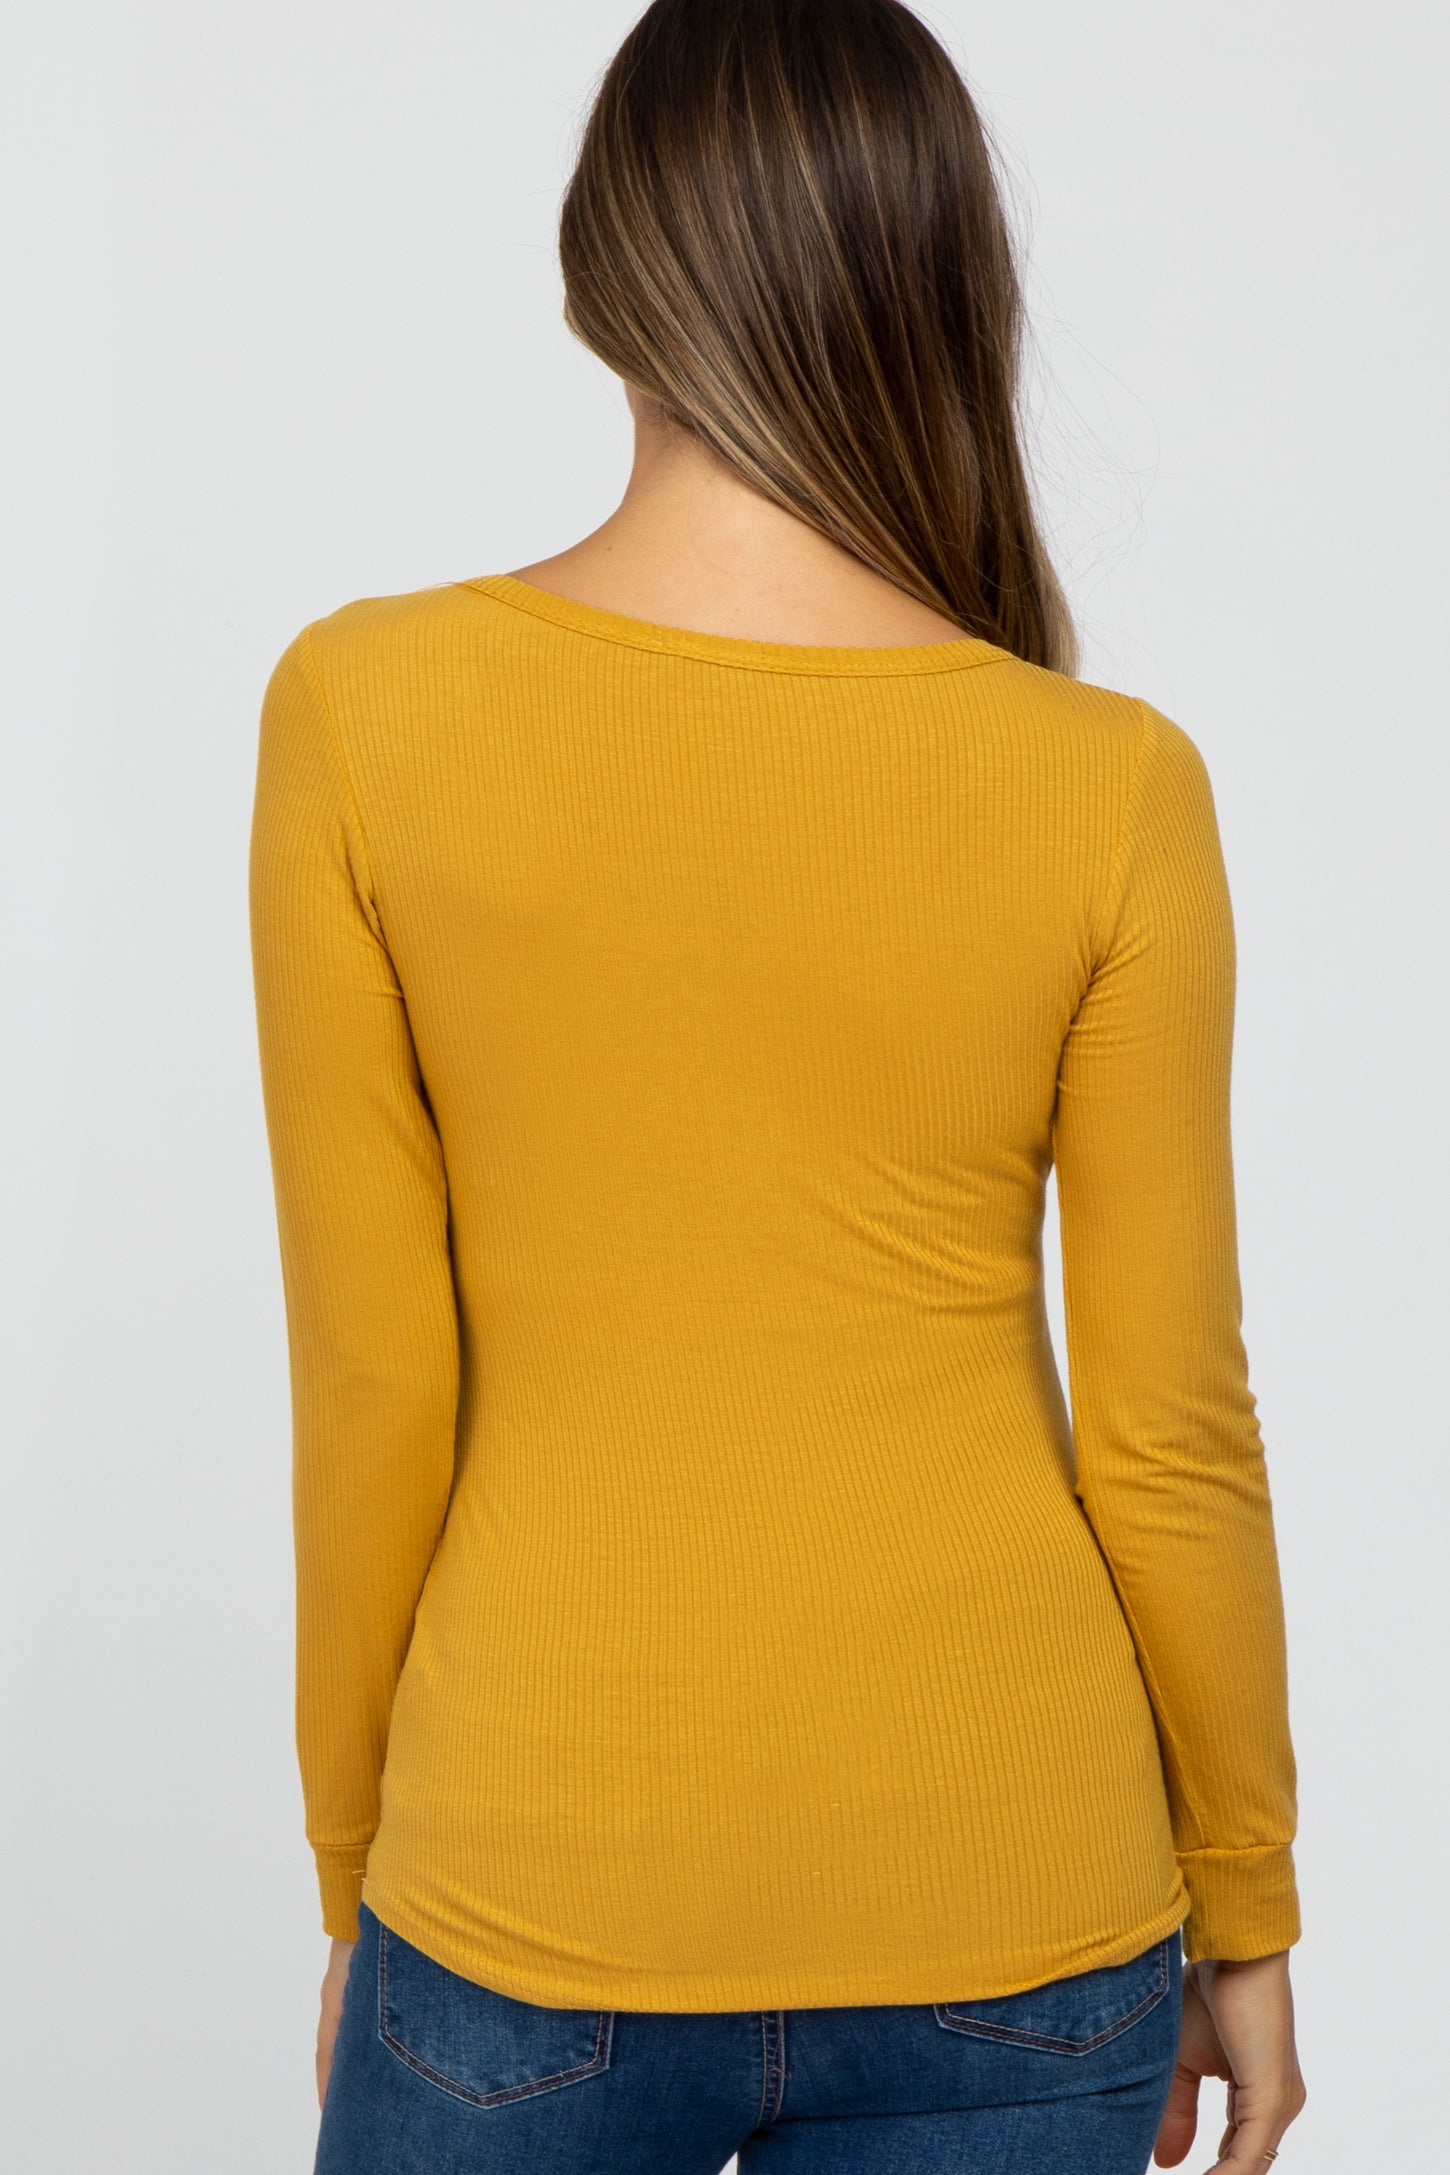 Yellow Ribbed Button Front Maternity Top